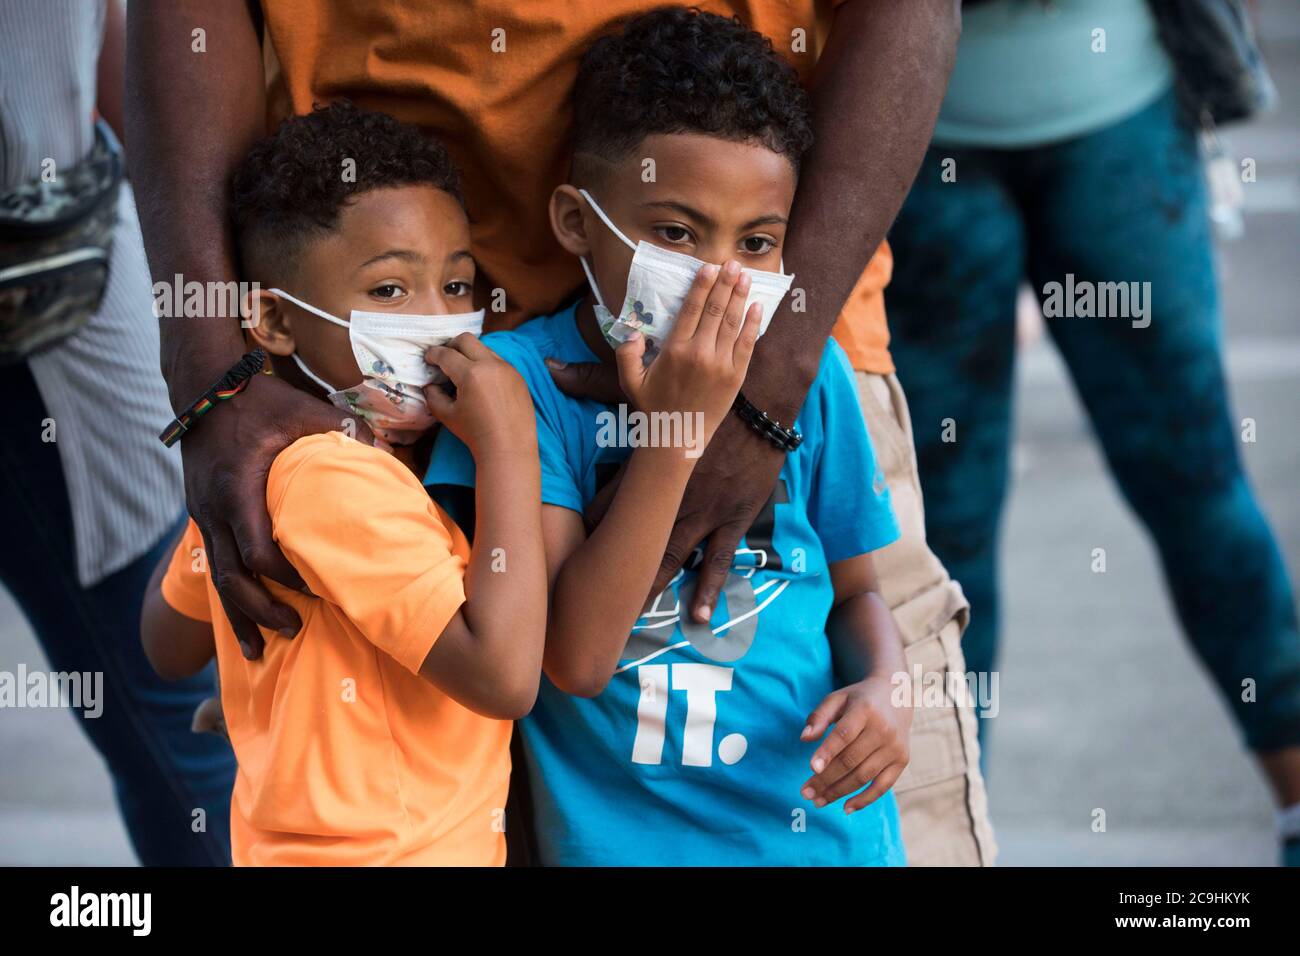 July 29, 2020, Gresham, OREGON, USA: GERMAINE FLENTROY, rests his hands on his two sons GEREME (cq) (left, in orange t-shirt), age 4, and GERMAN (cq), right, age 6, while listening to newest Gresham City Councilor VINCE JONES-DIXON address the crowd during the Black Lives Matter Peaceful Family Rally at Gresham City Hall in Oregon on Wednesday, July 29, 2020. JONES-DIXON is first Black man to serve as a City Councilor and was appointed on July 21st. Gresham's City Council voted on Monday, July 20th to raise the Black Lives Matter flag at City Hall and came under attack from the Multnomah Coun Stock Photo